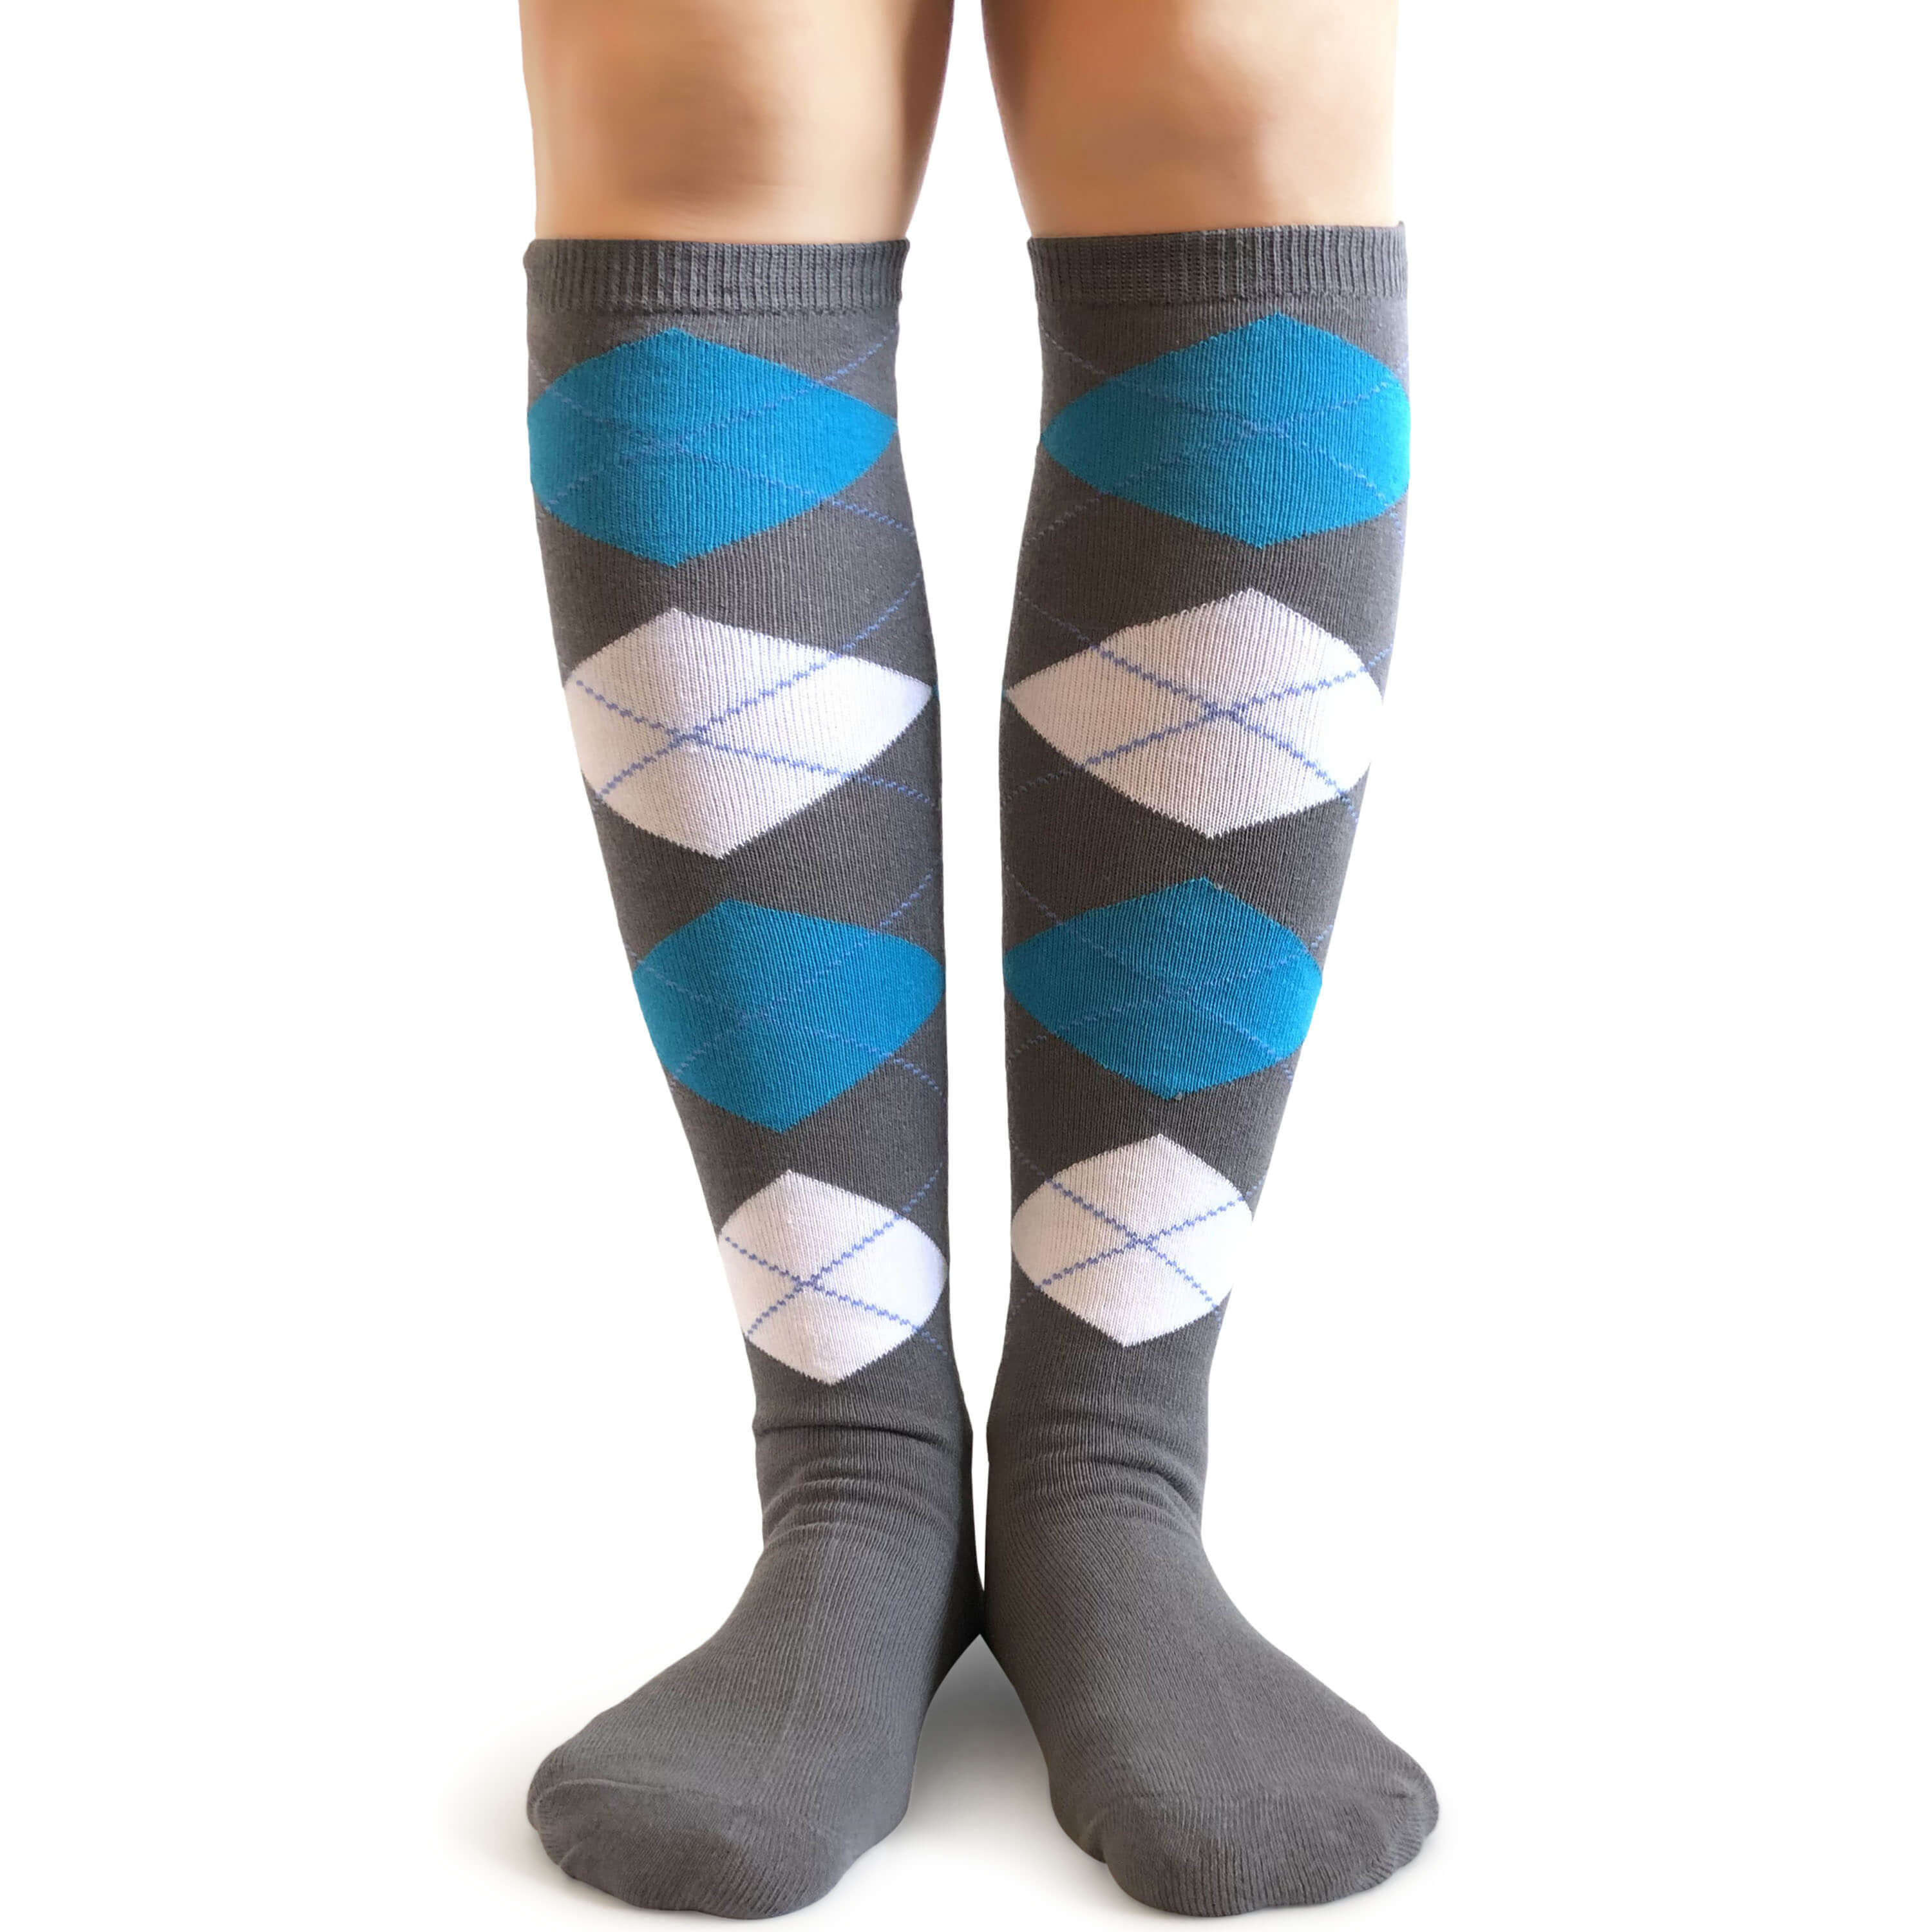 Charcoal Grey with Turquoise & White Argyle Knee High Socks